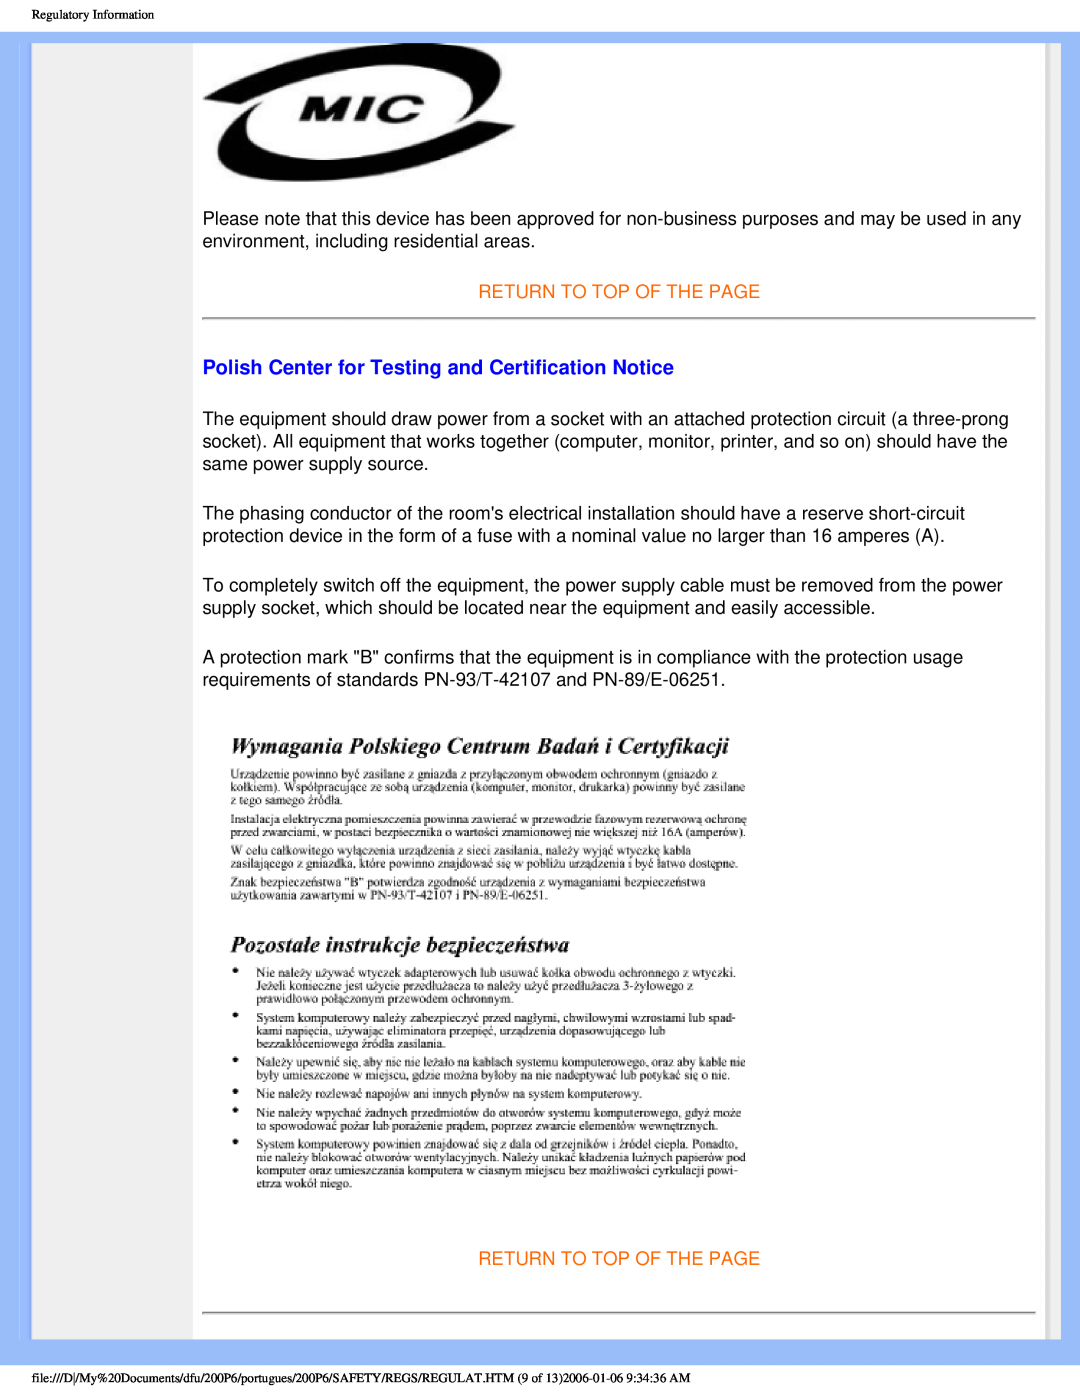 Philips 200P6 user manual Polish Center for Testing and Certification Notice, Return To Top Of The Page 